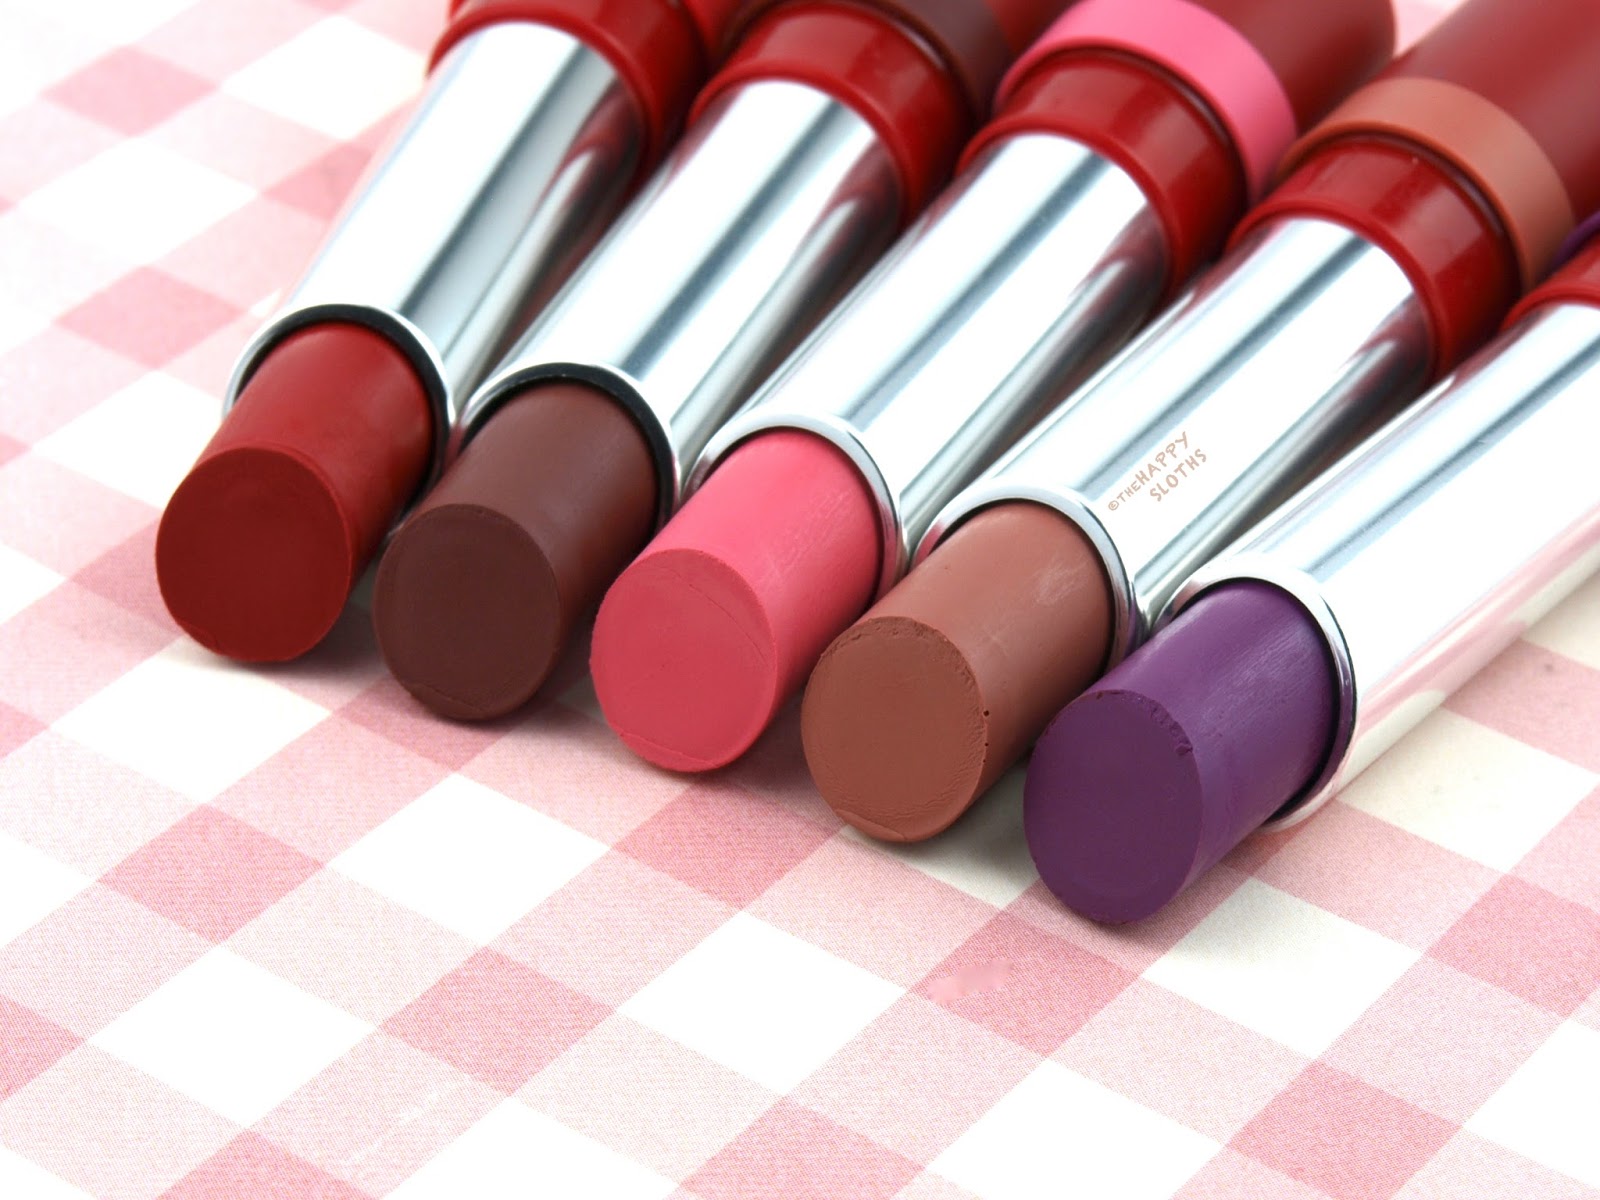 Rimmel London The Only 1 Matte Lipstick: Review and Swatches